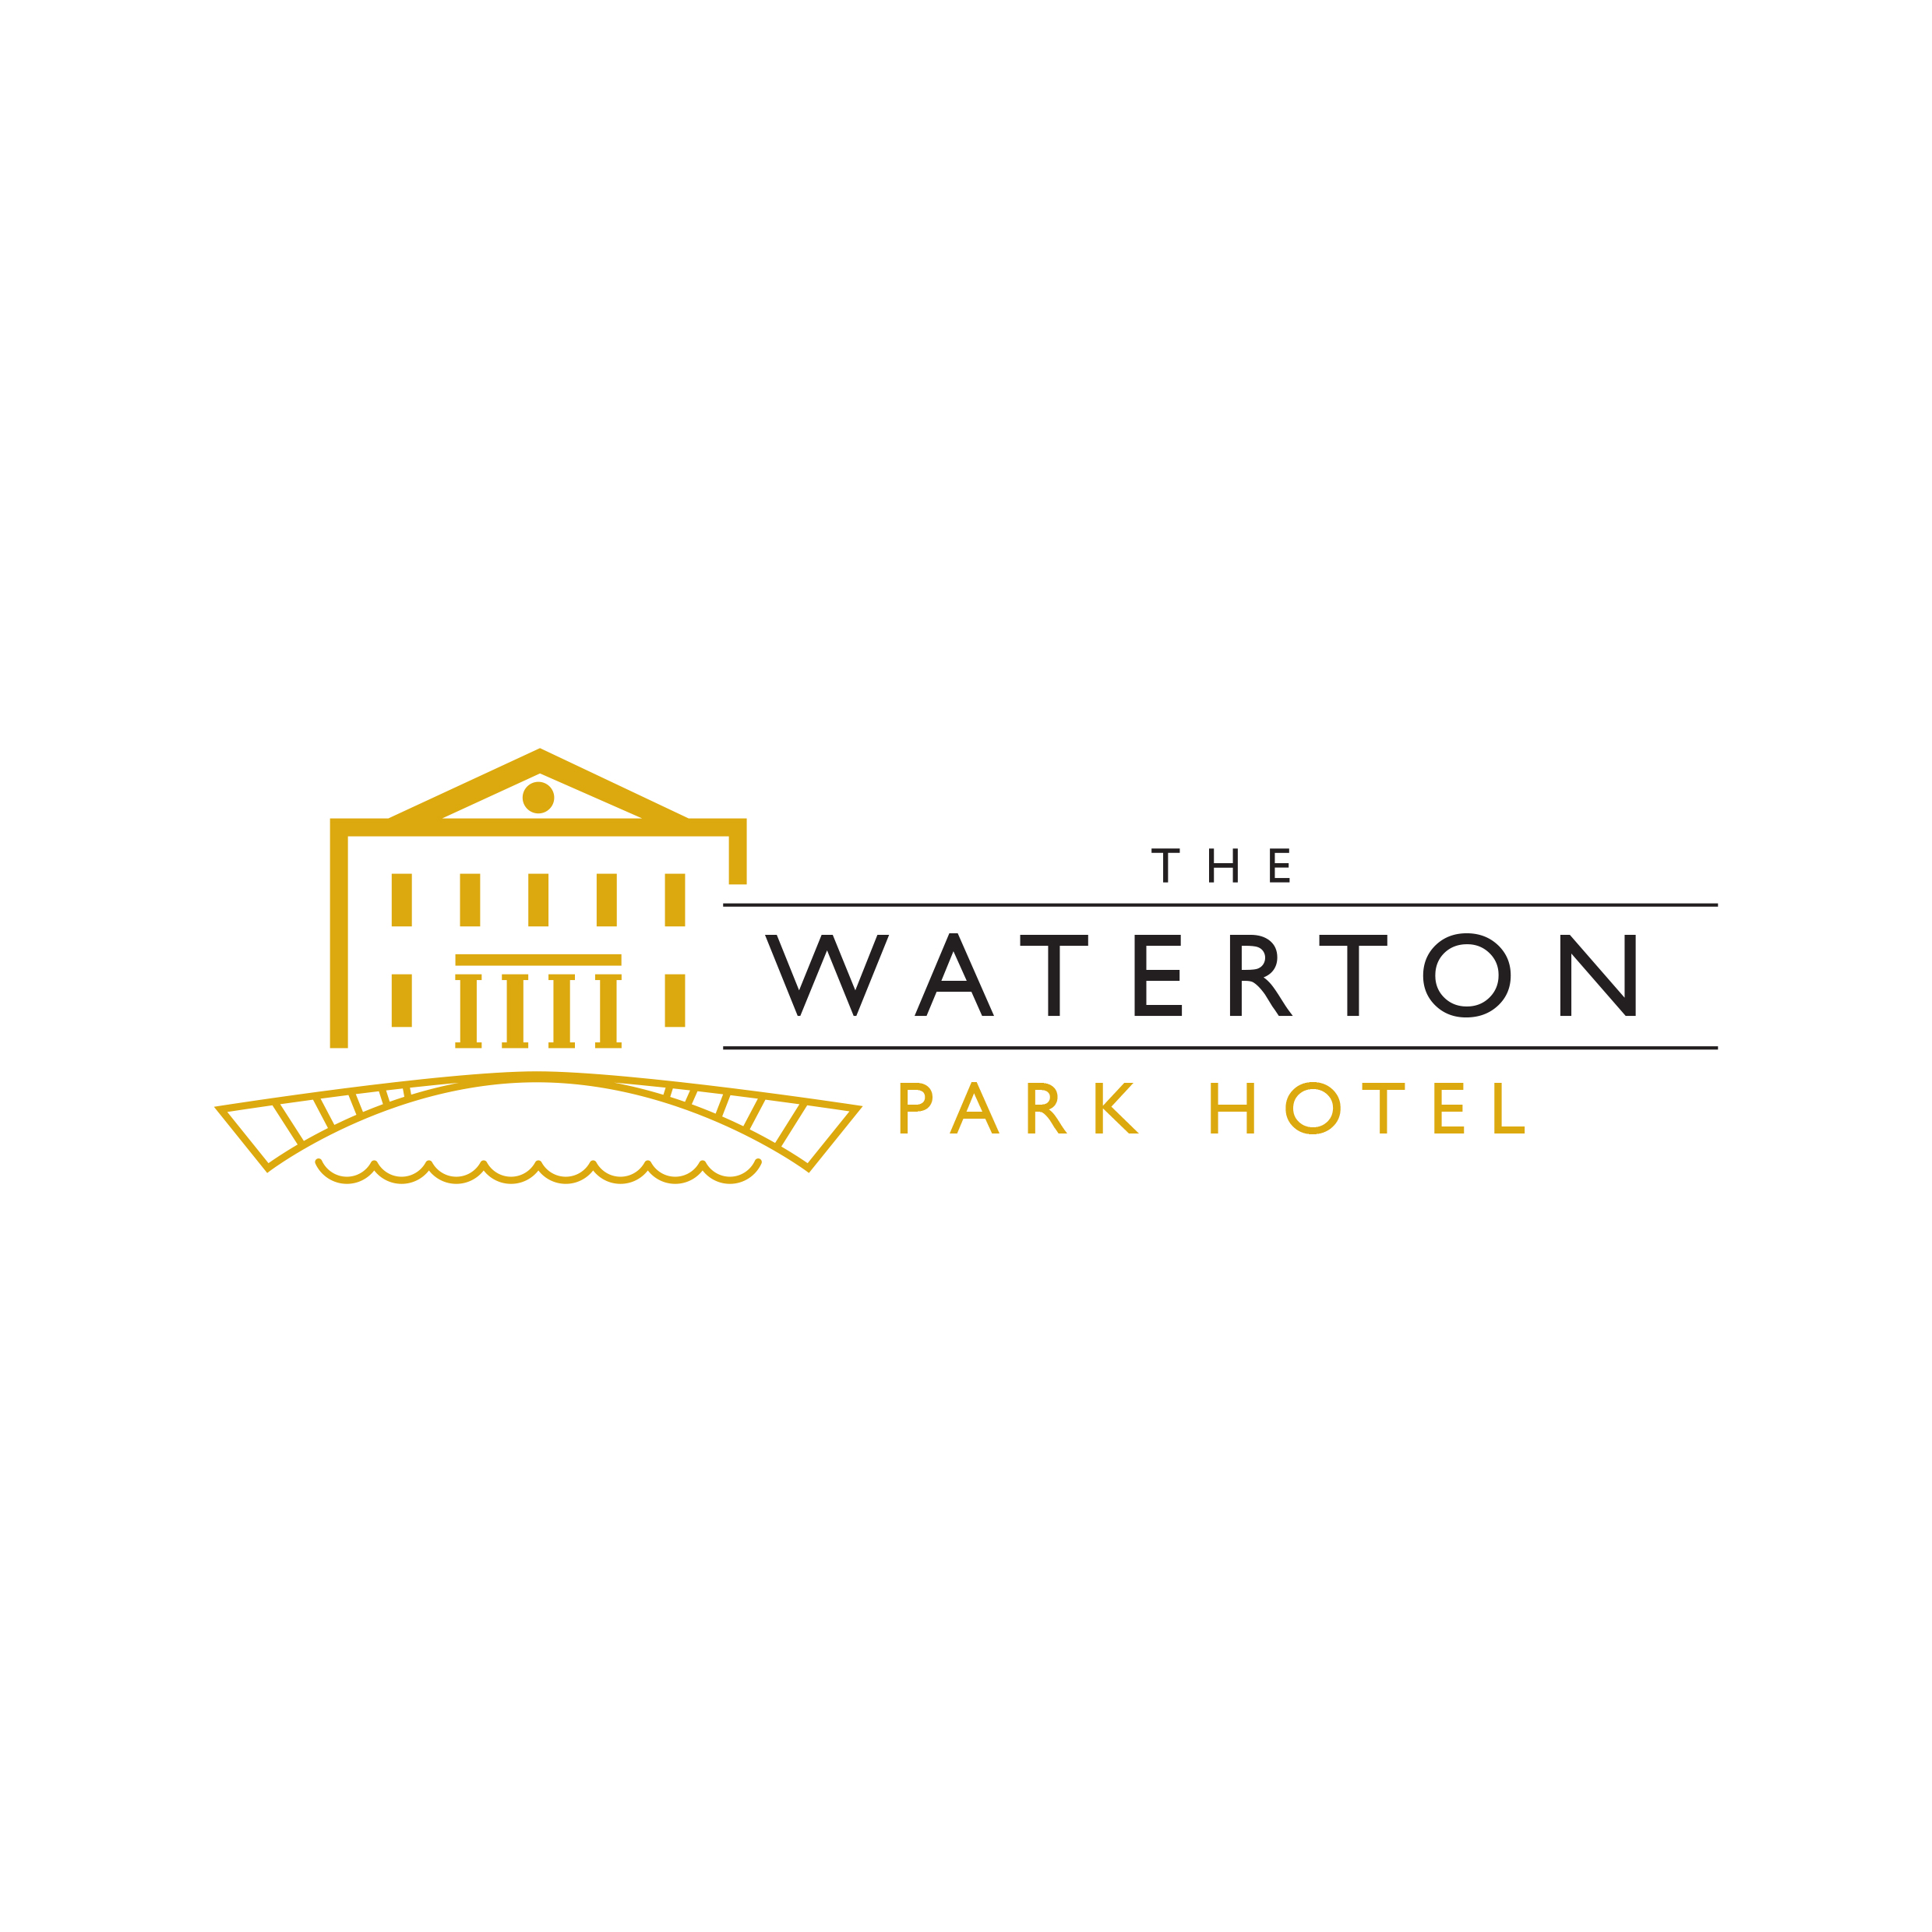 The Waterton Park Hotel and Spa